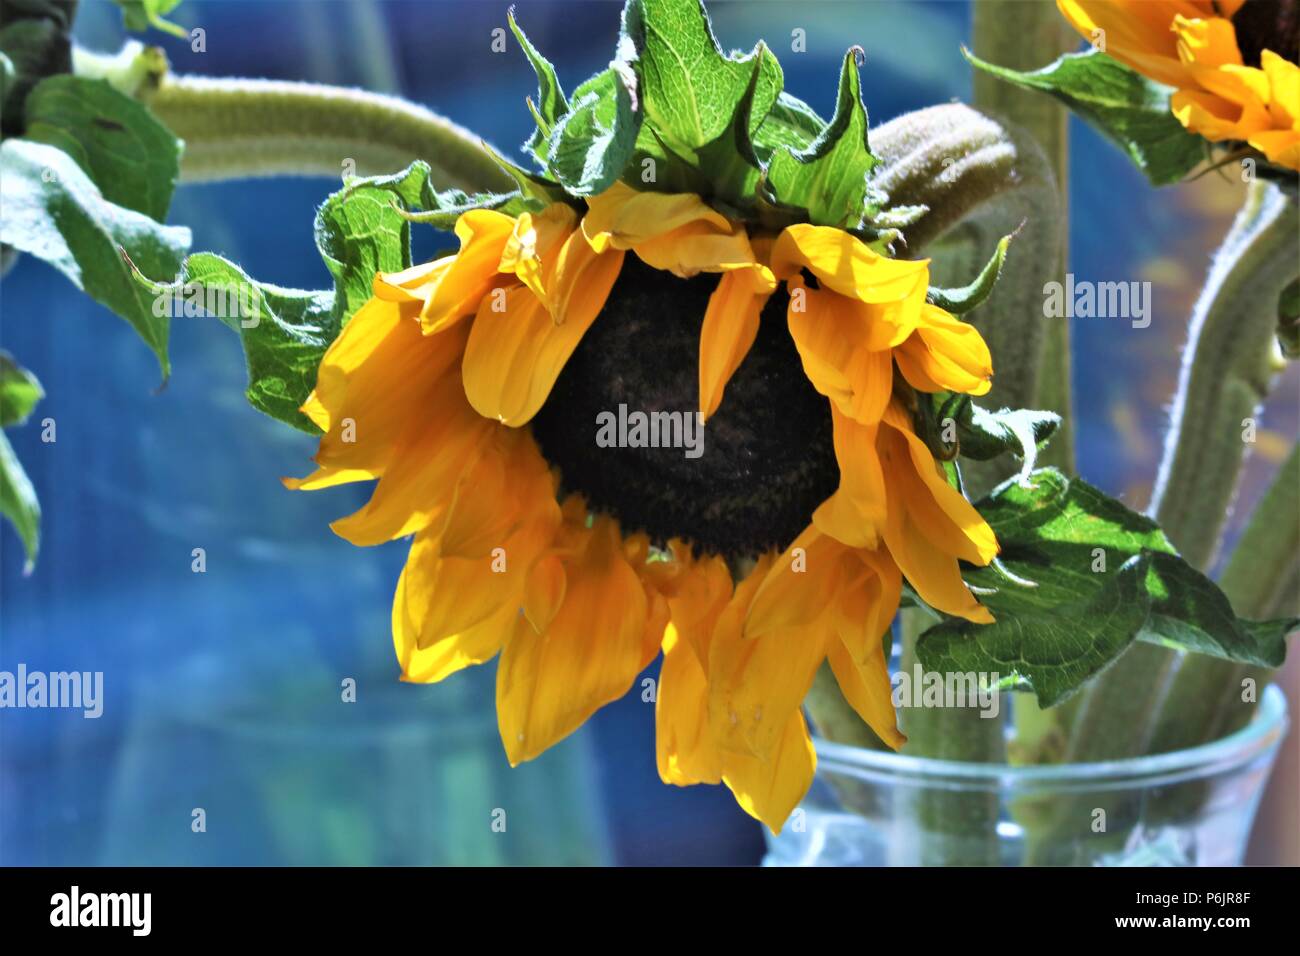 Big sunflowers wilting in a vase against a blue blurred background Stock Photo